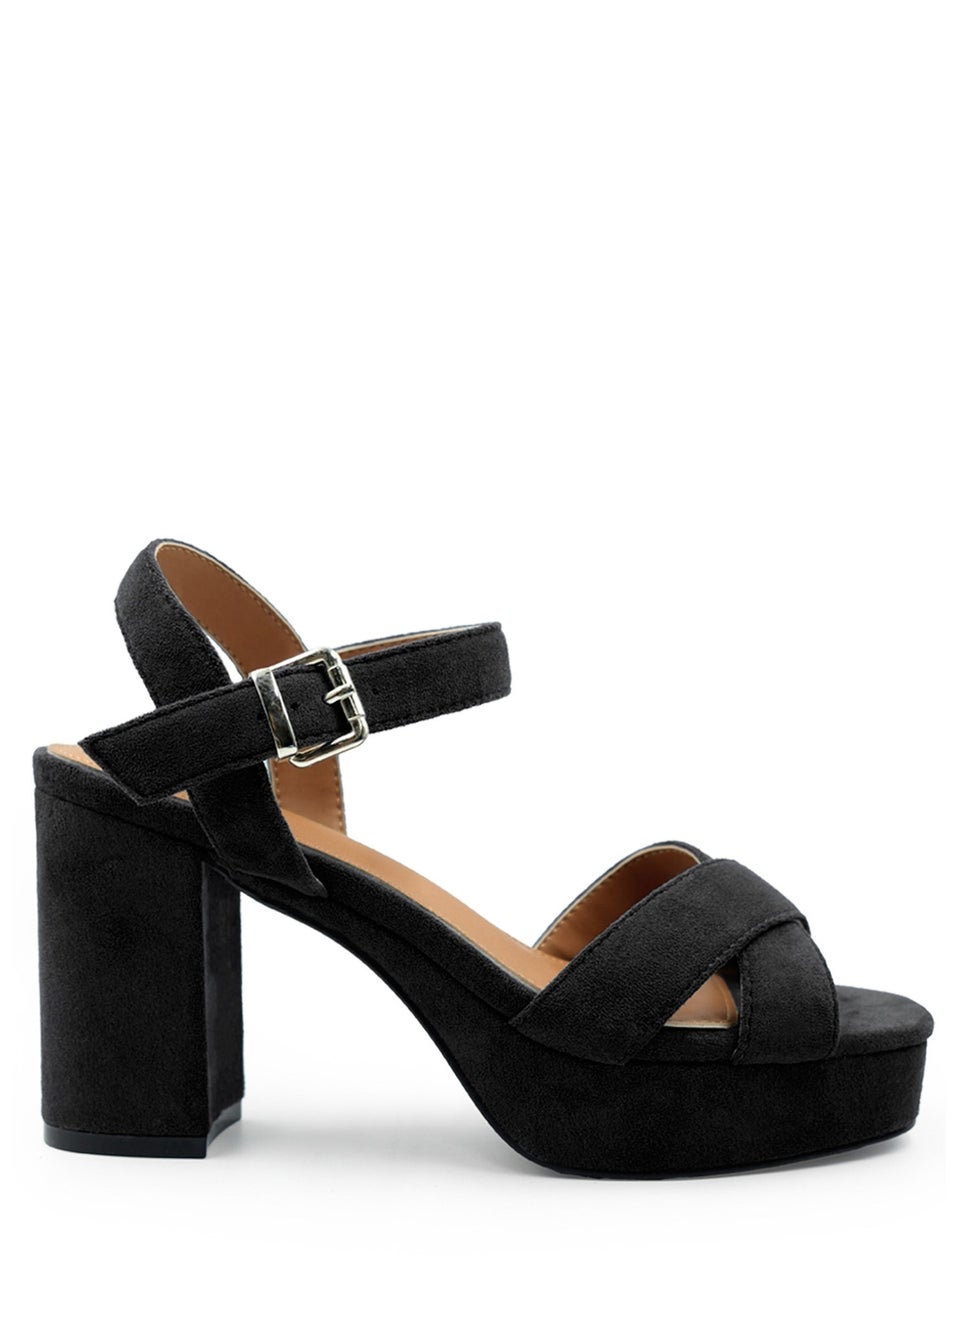 Where's That From Black Marcia Wide Fit Suede Platform Heels